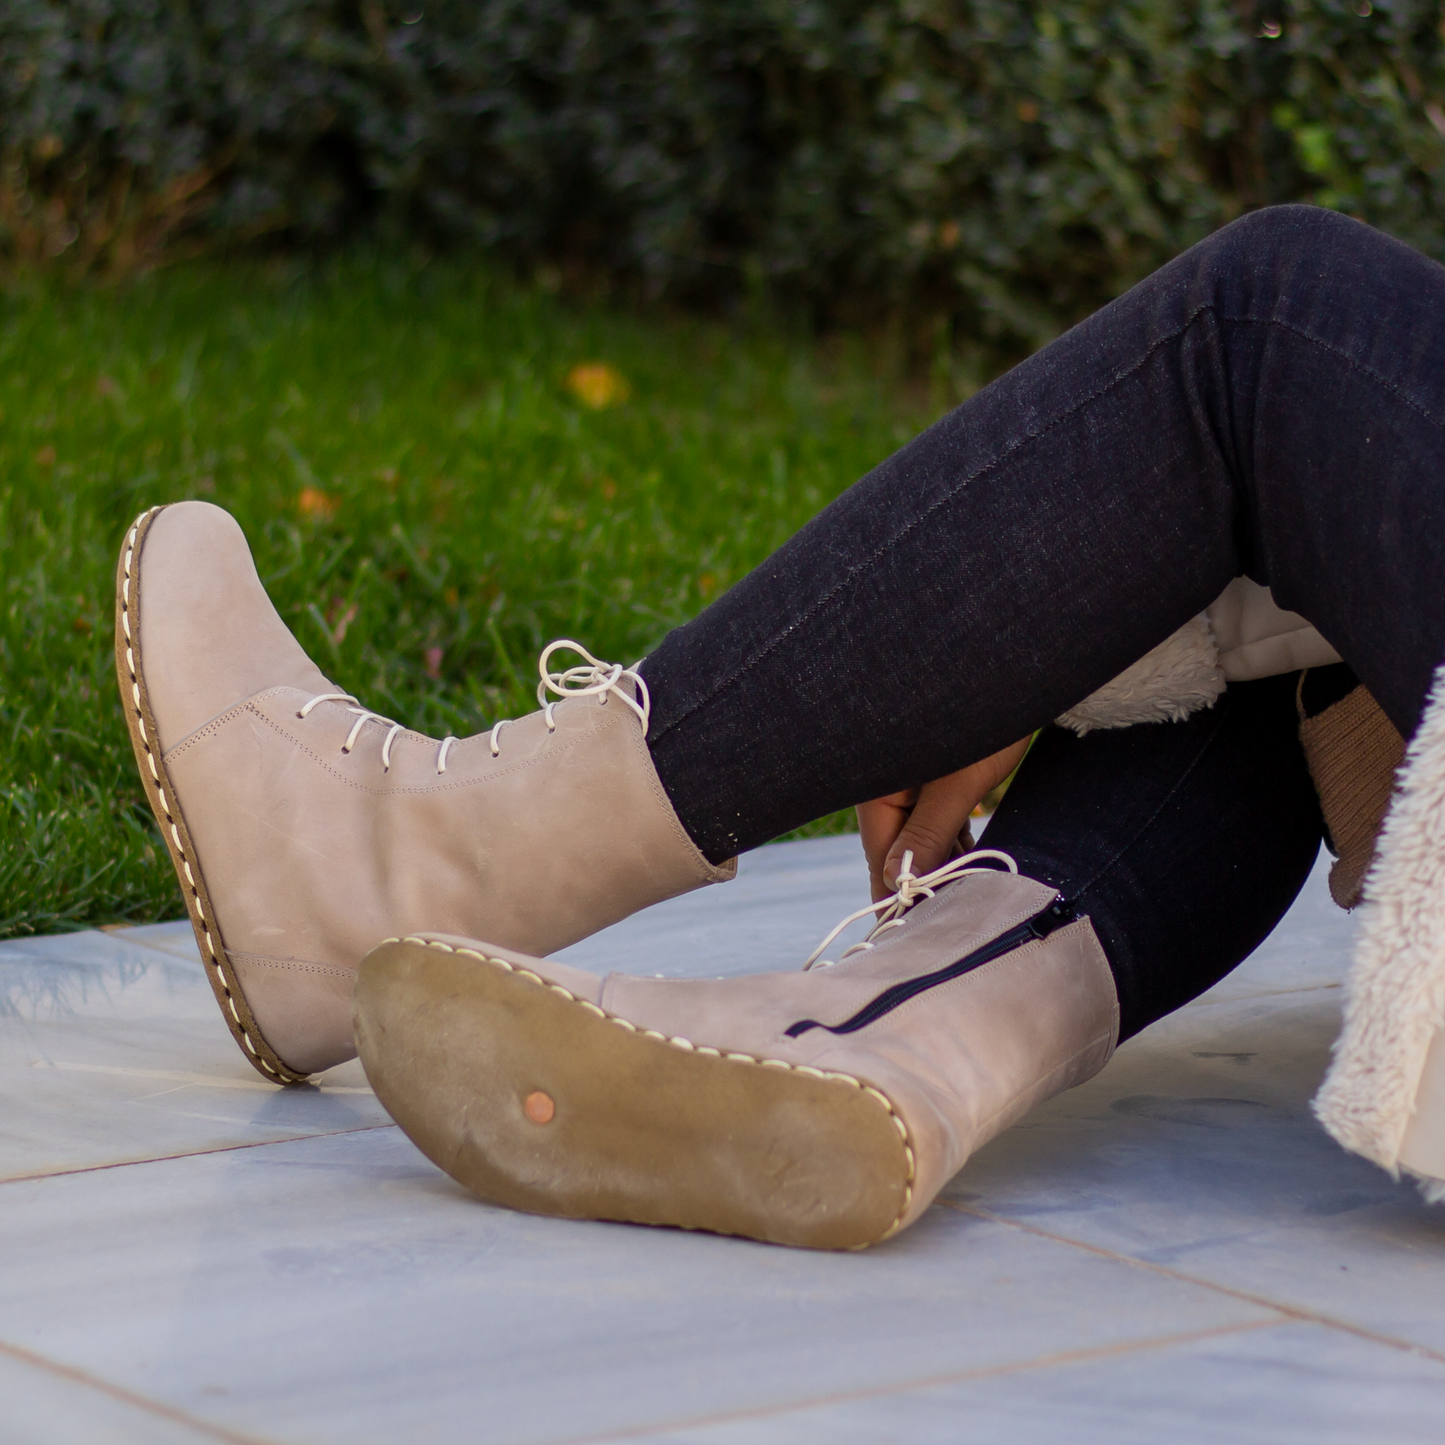 Tan Leather Boot | Barefoot Women Boot | Earthing Leather Boots | womenboots | Grounding Copper Rivet | Buffalo Leather | Crazy Vision